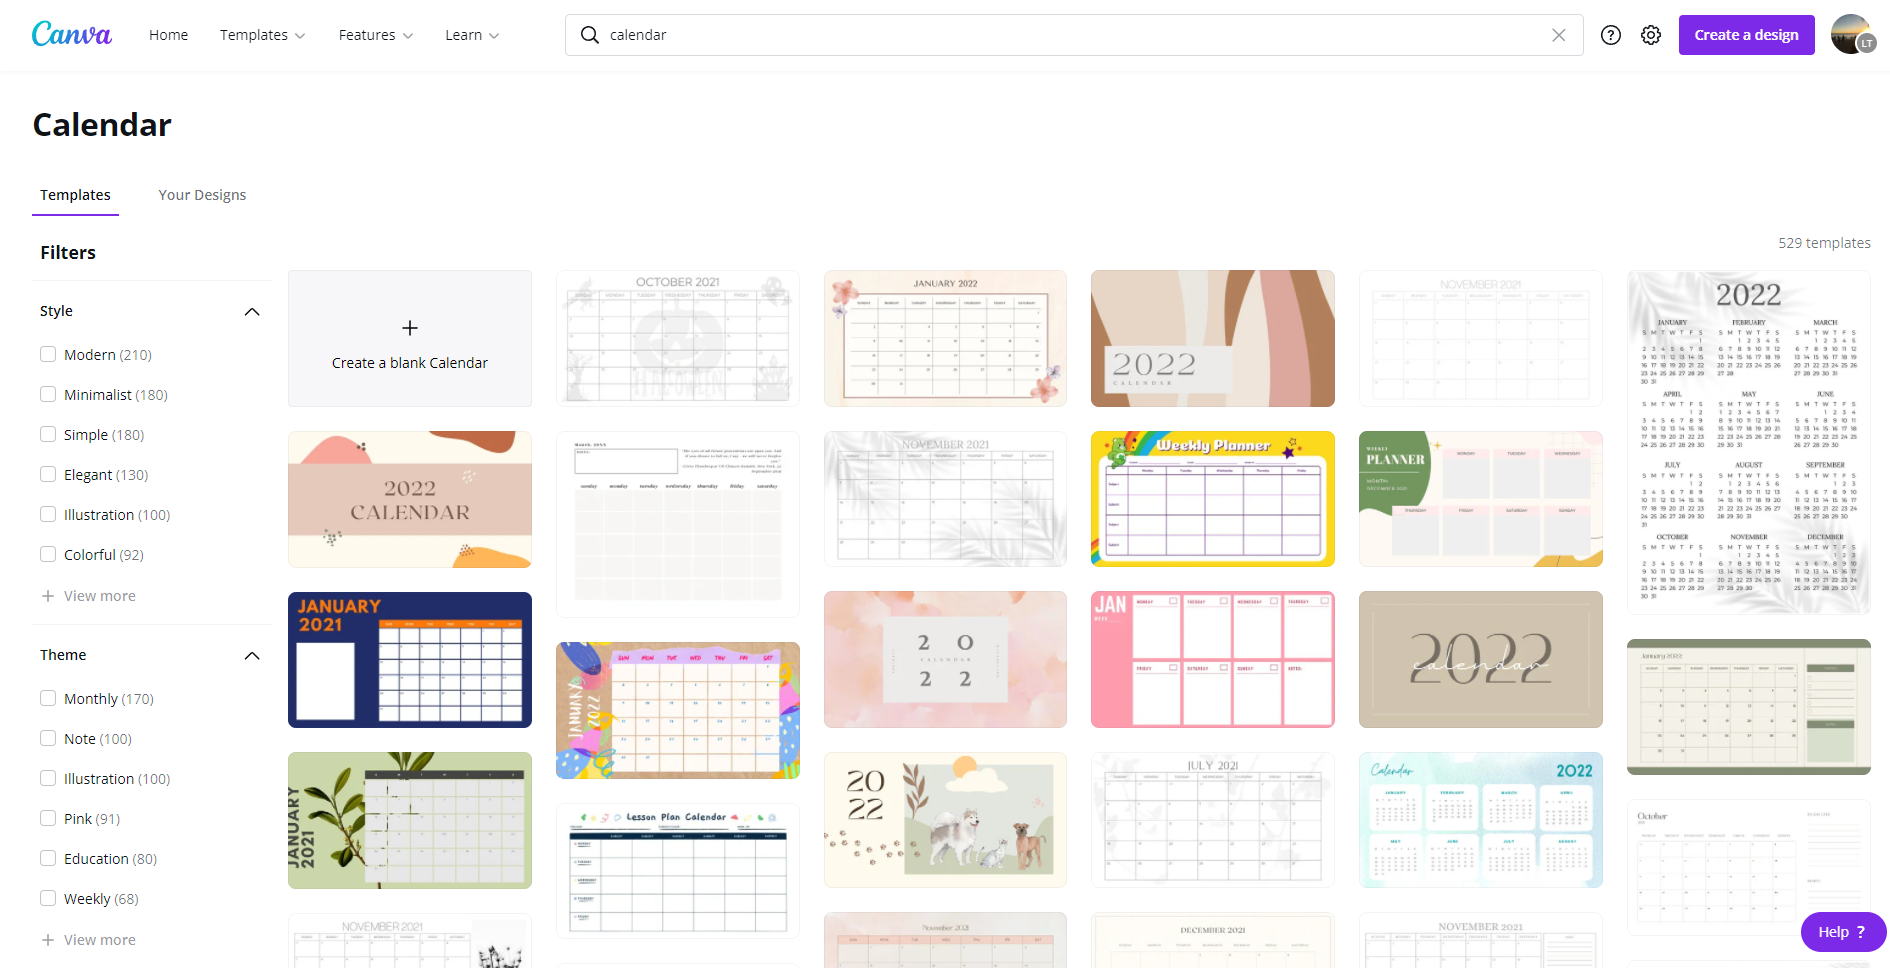 Different calendar templates available in Canva